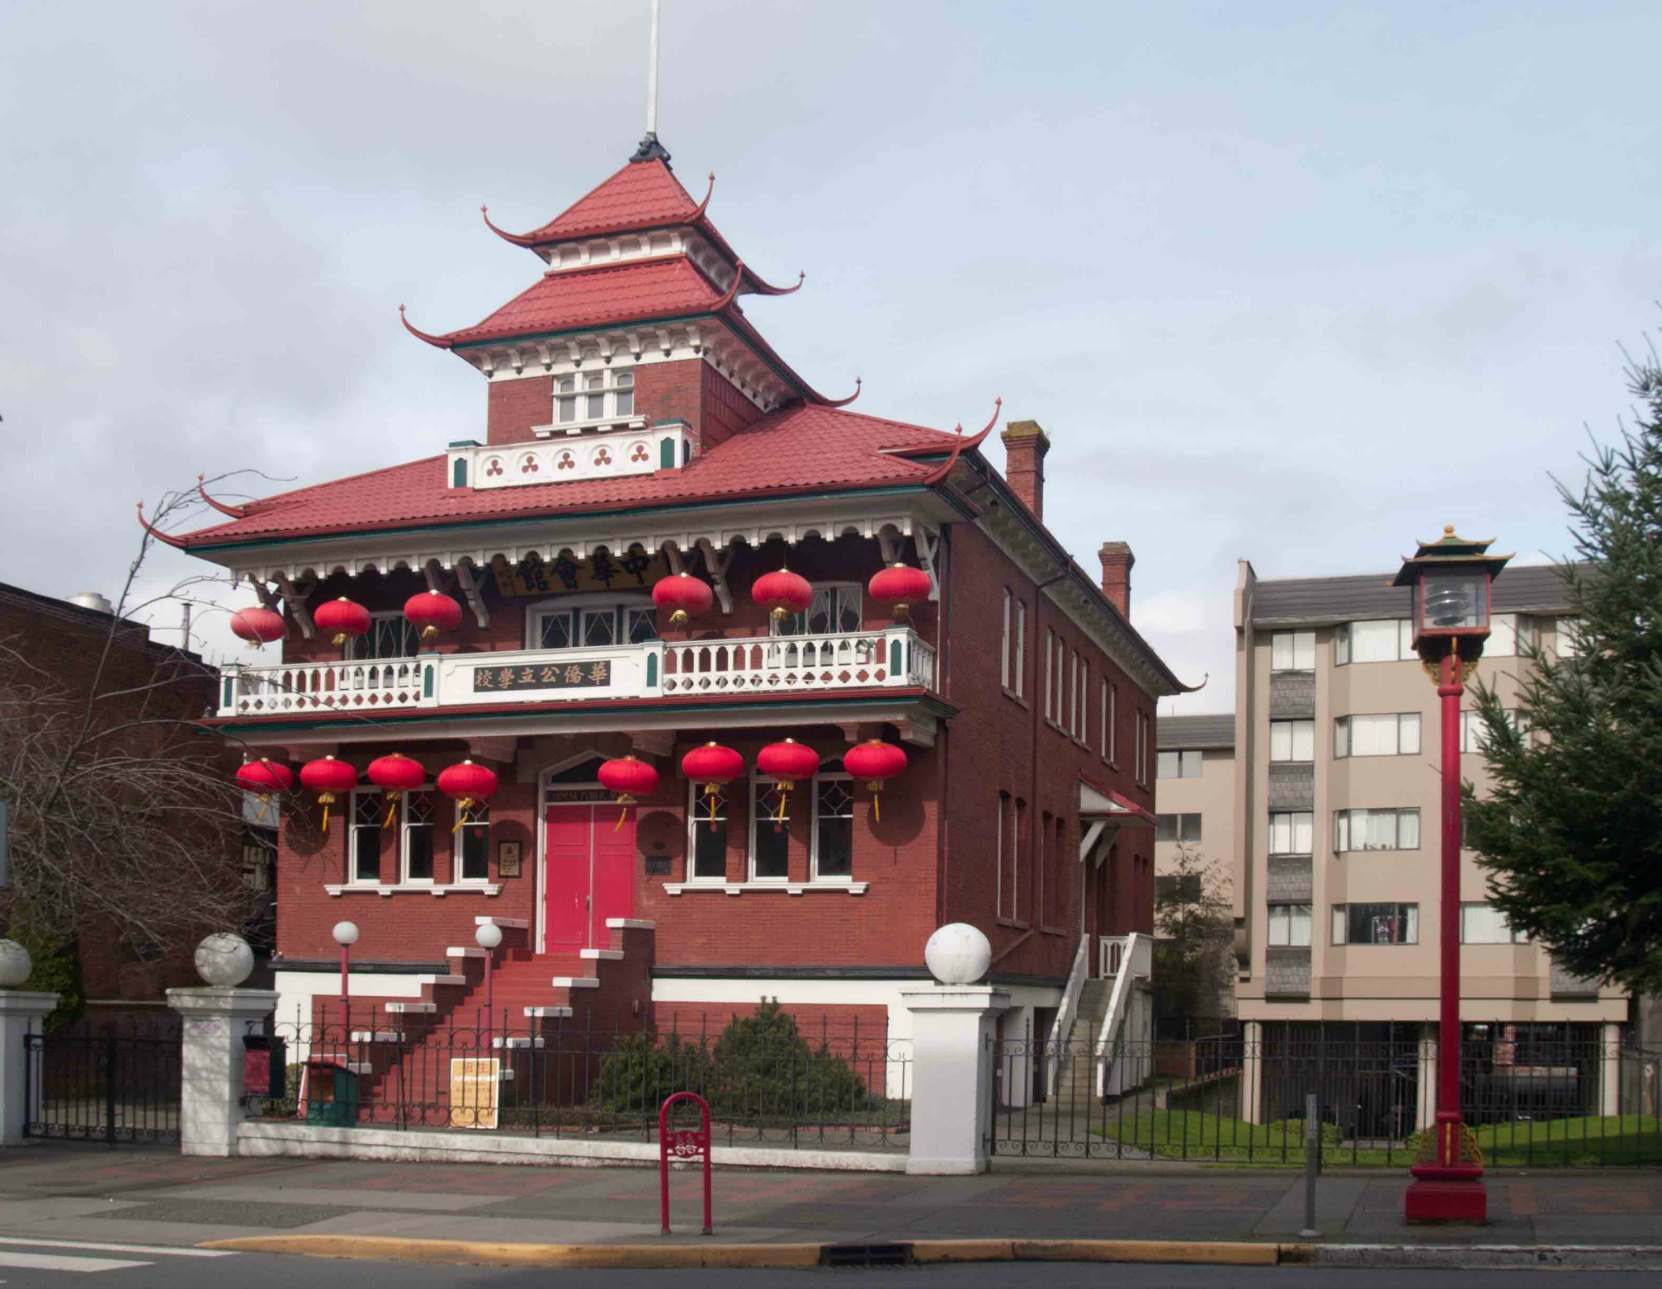 Chinese Public School at 636 Fisgard Street, built in 1908 by architect David C. Frame for the Chinese Consolidated Benevolent Association.